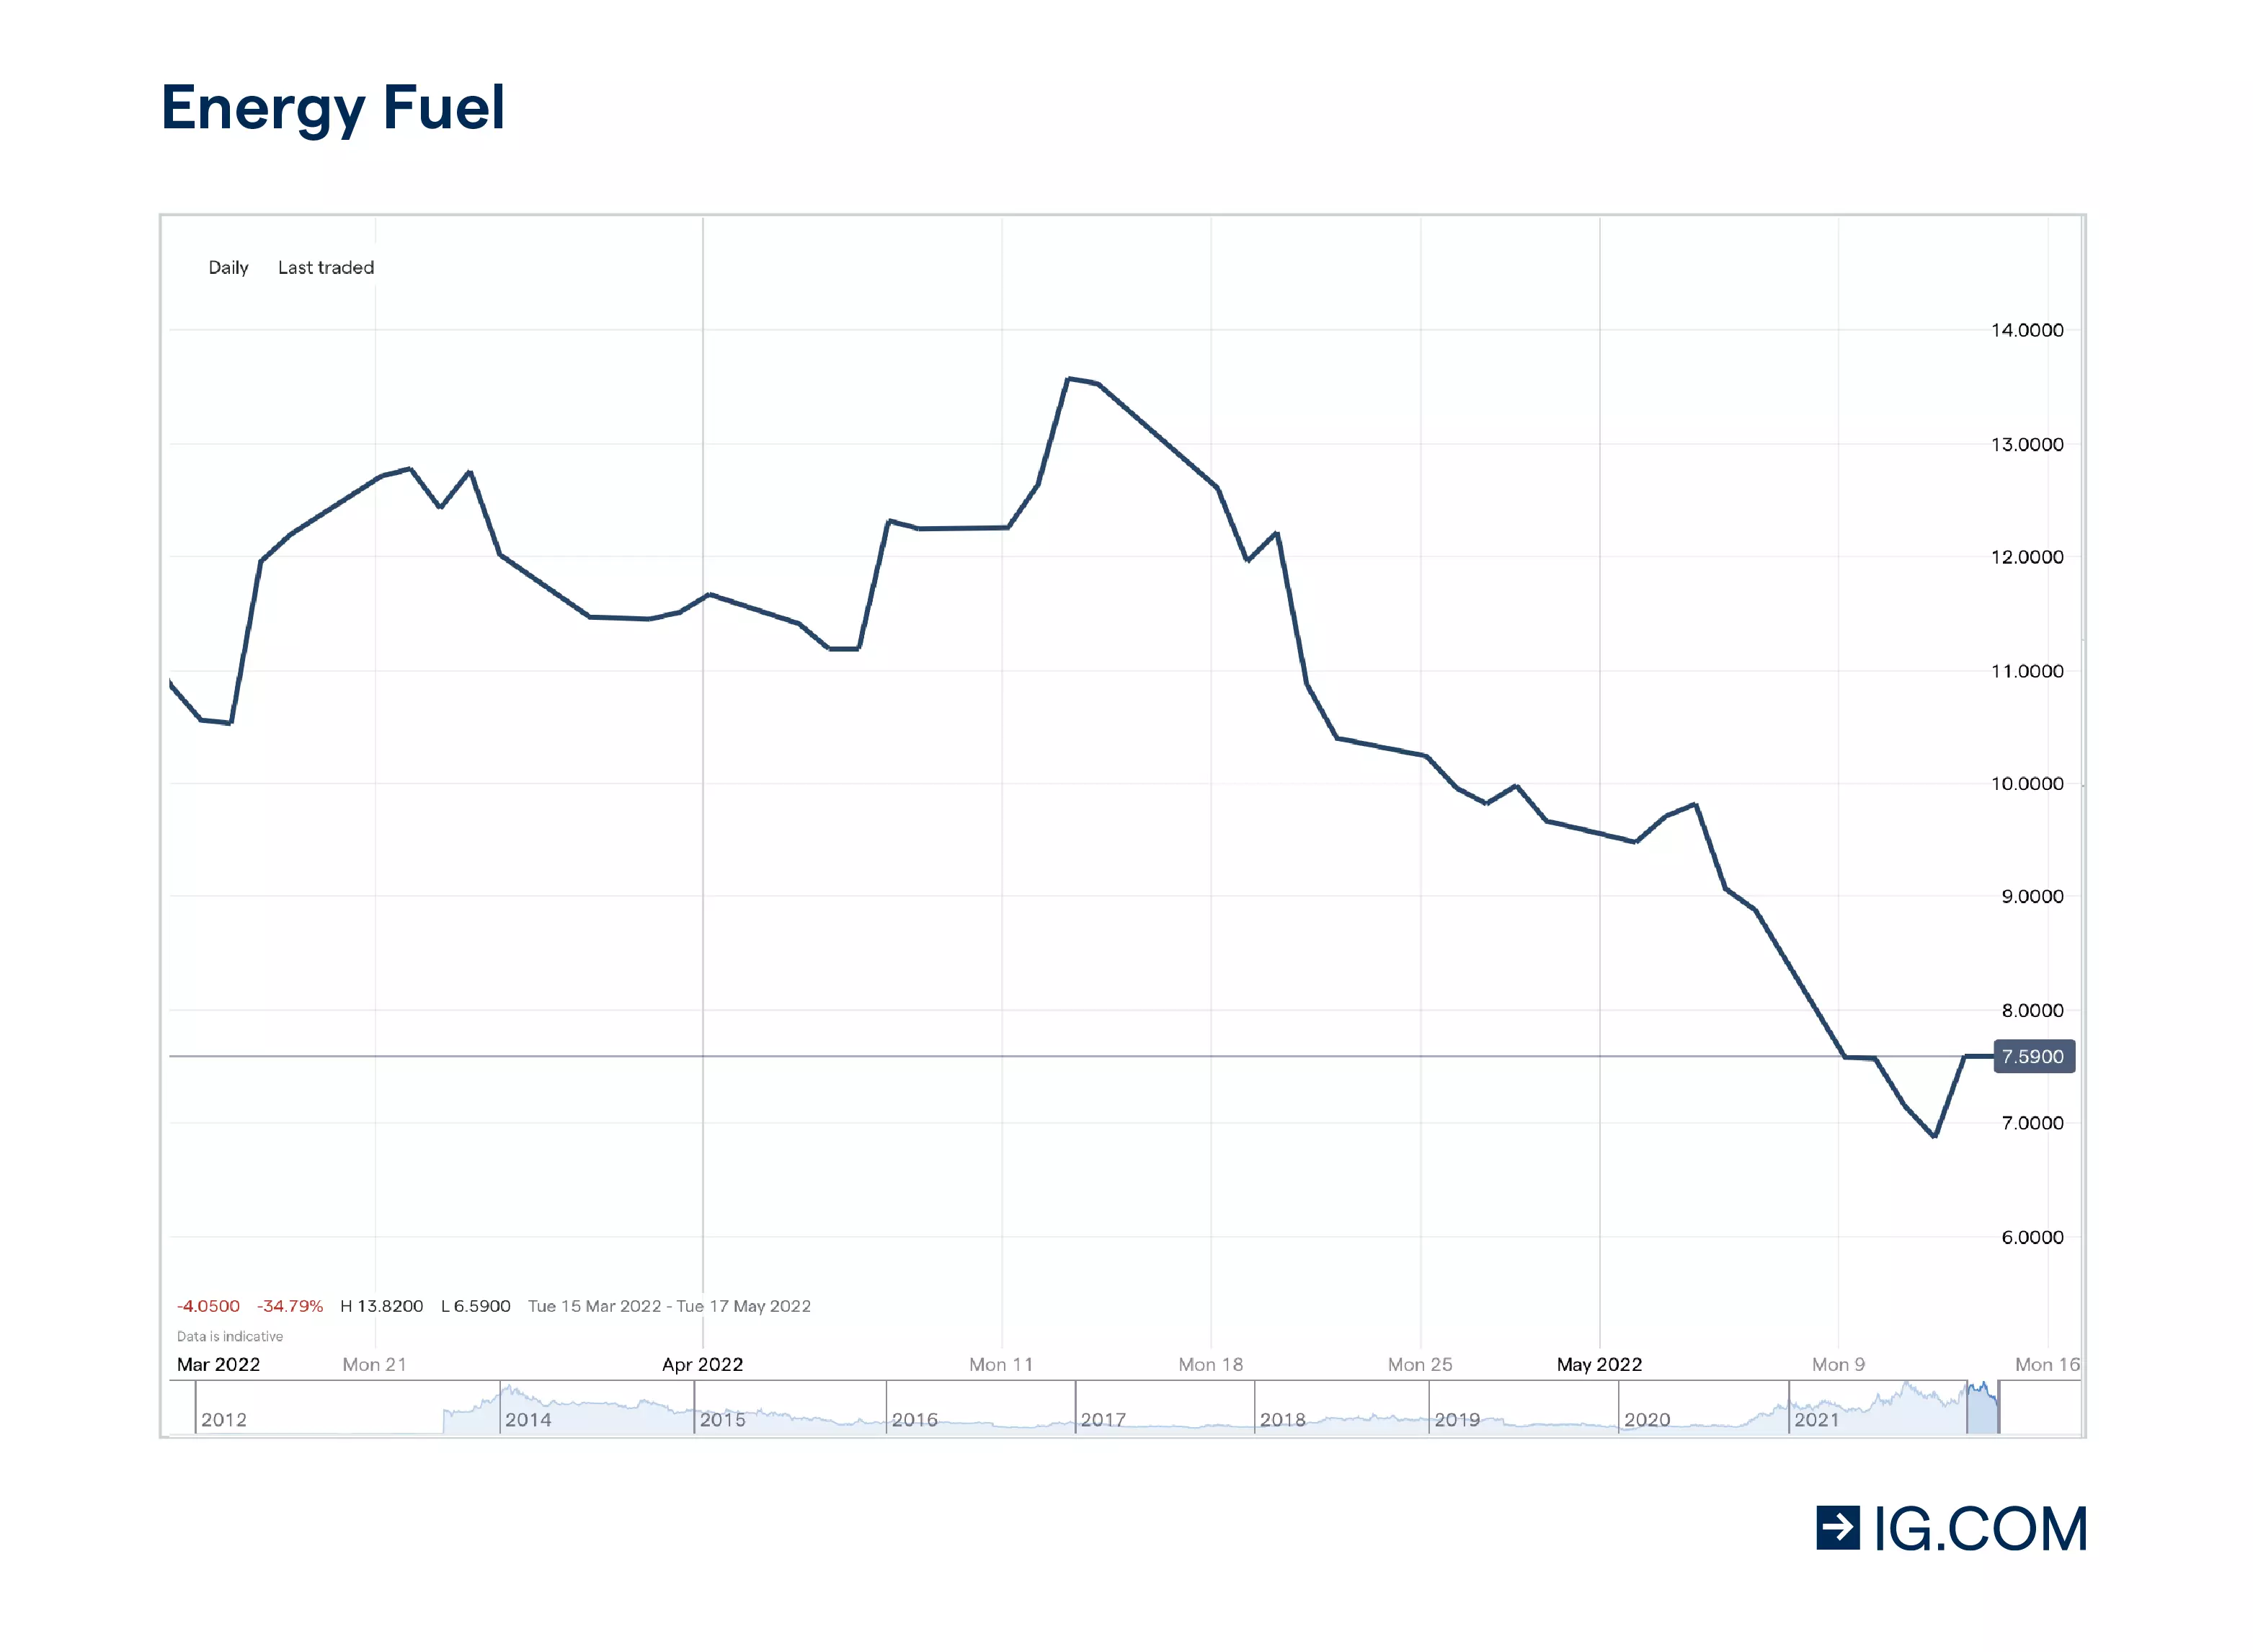 Energy Fuels price chart showing the how the stock has increased from $5.55 a year prior to $10.42 per share